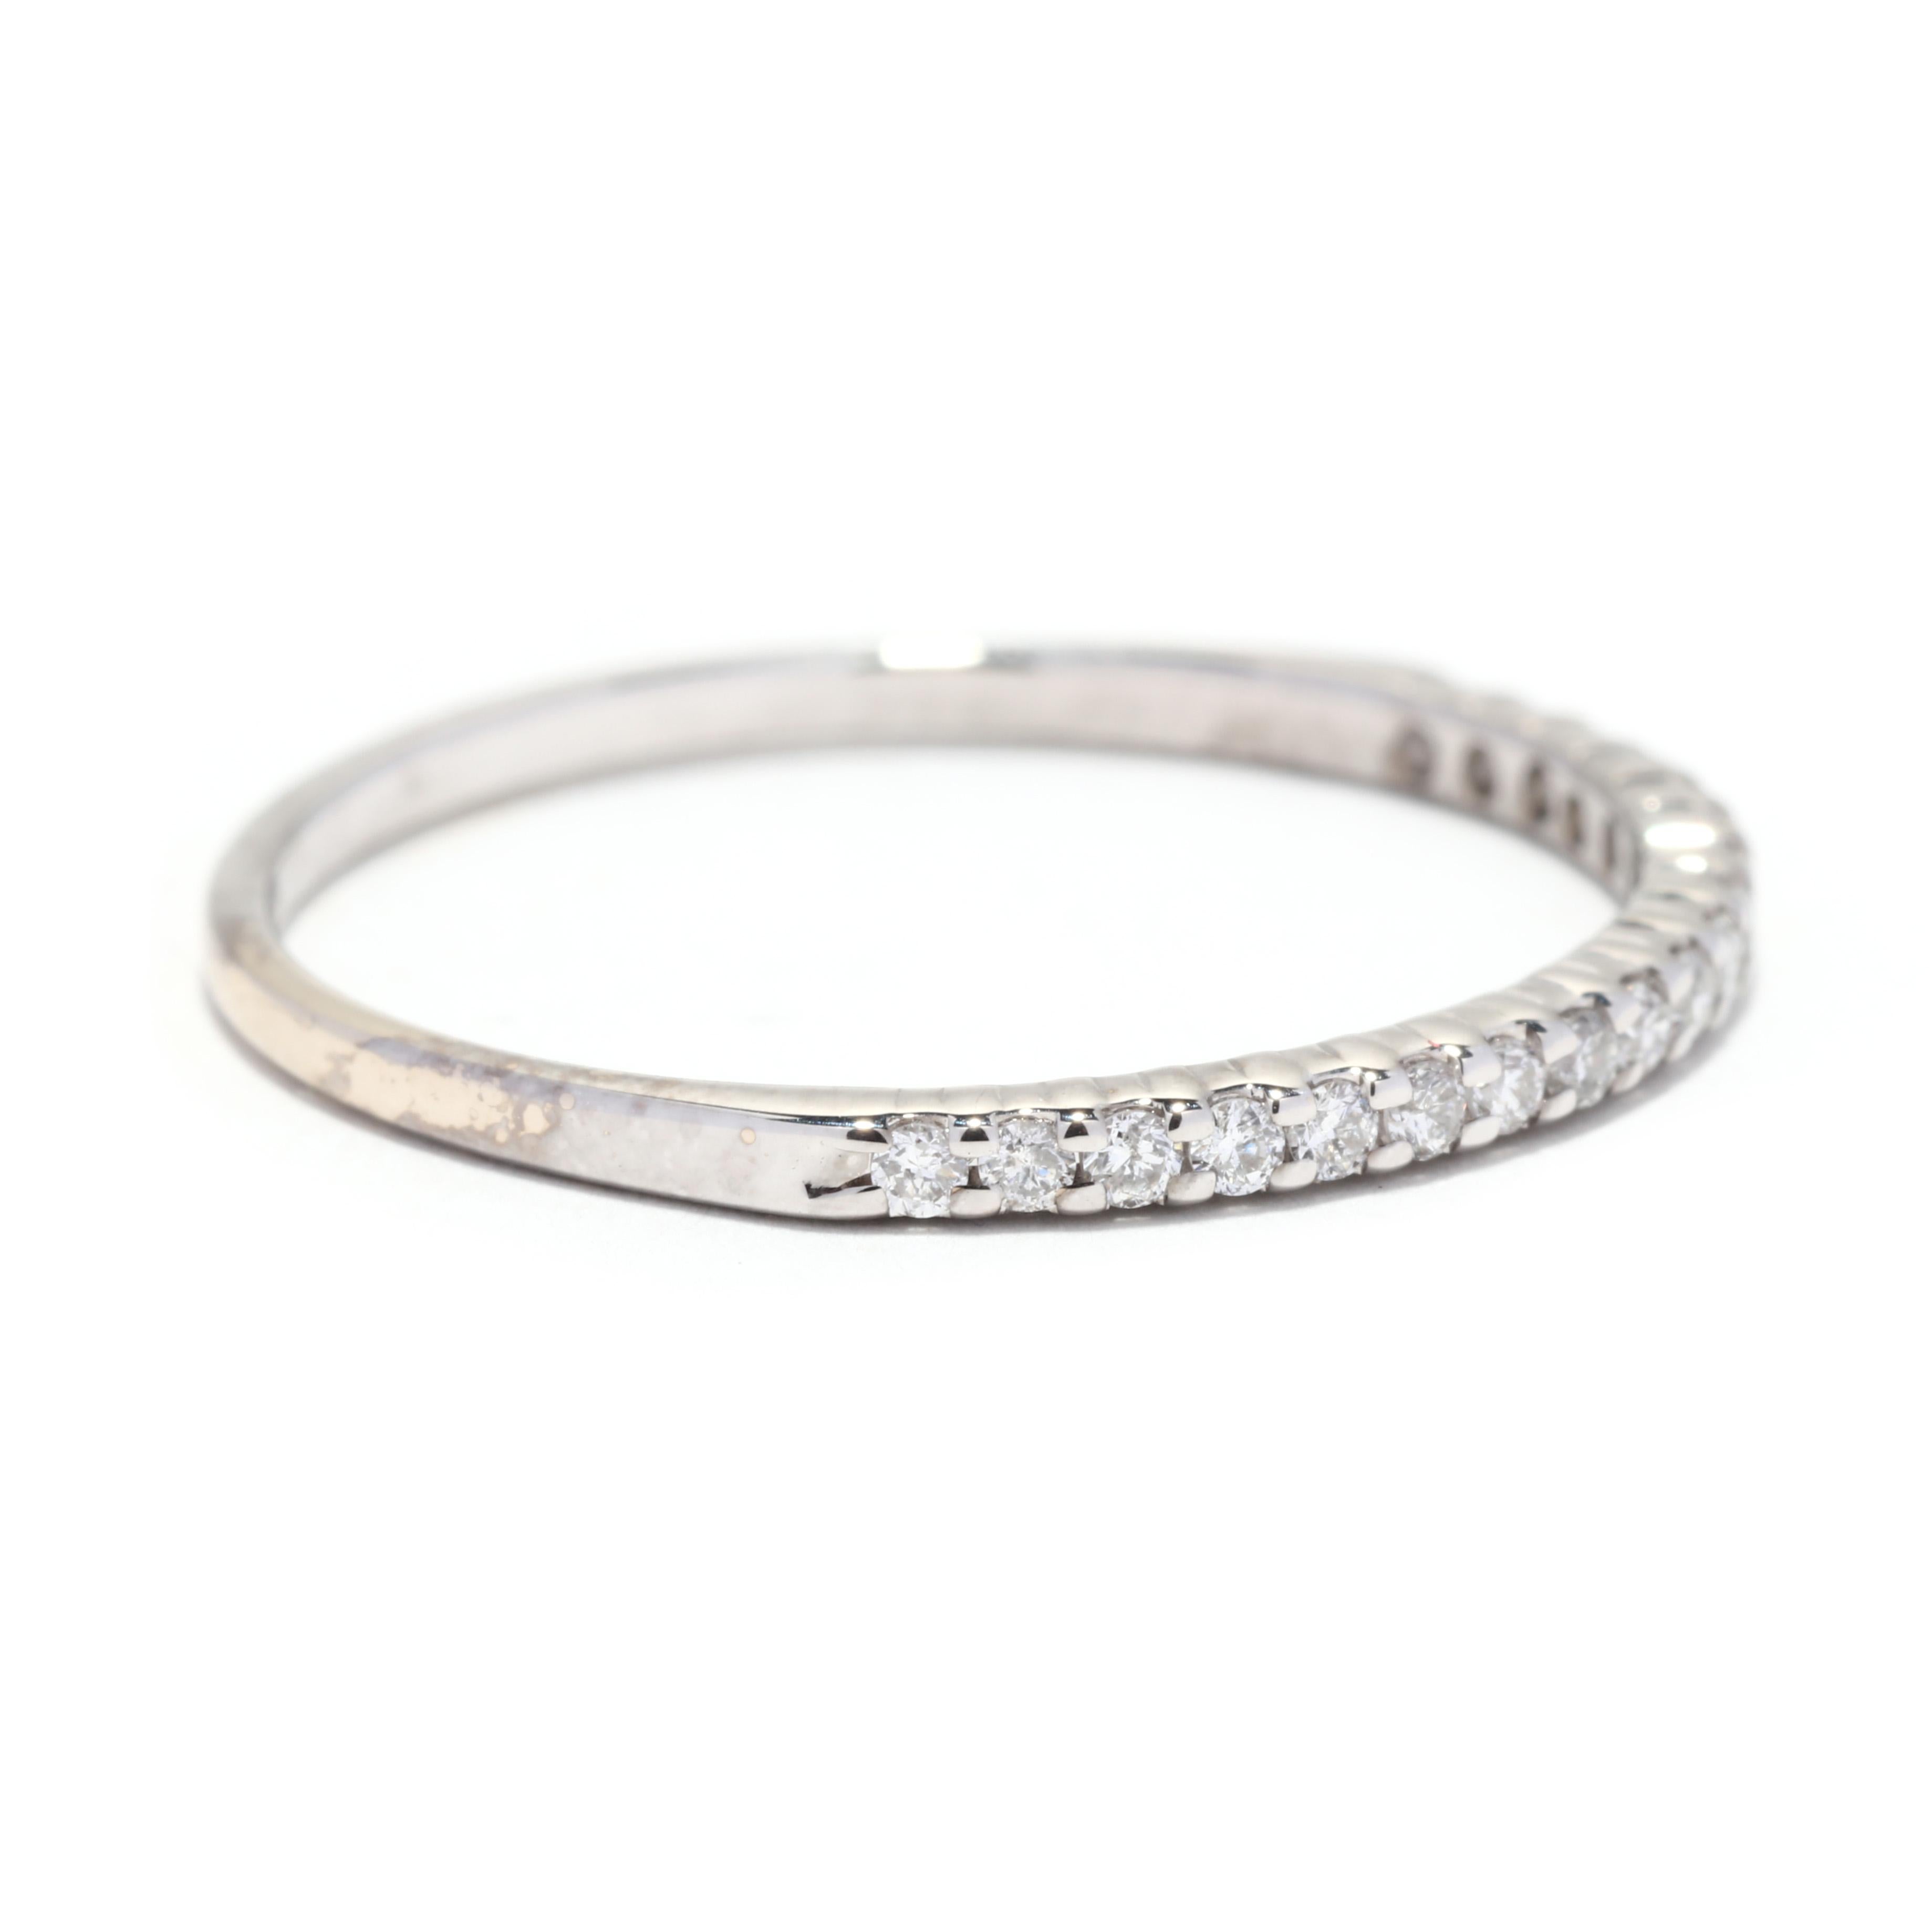 Make a subtle statement with this stunning 0.20ctw diamond wedding band. Crafted in 14K white gold, this delicate ring is perfect for stacking with other rings or wearing alone. The thin ring features 0.20ctw of round brilliant diamonds for a